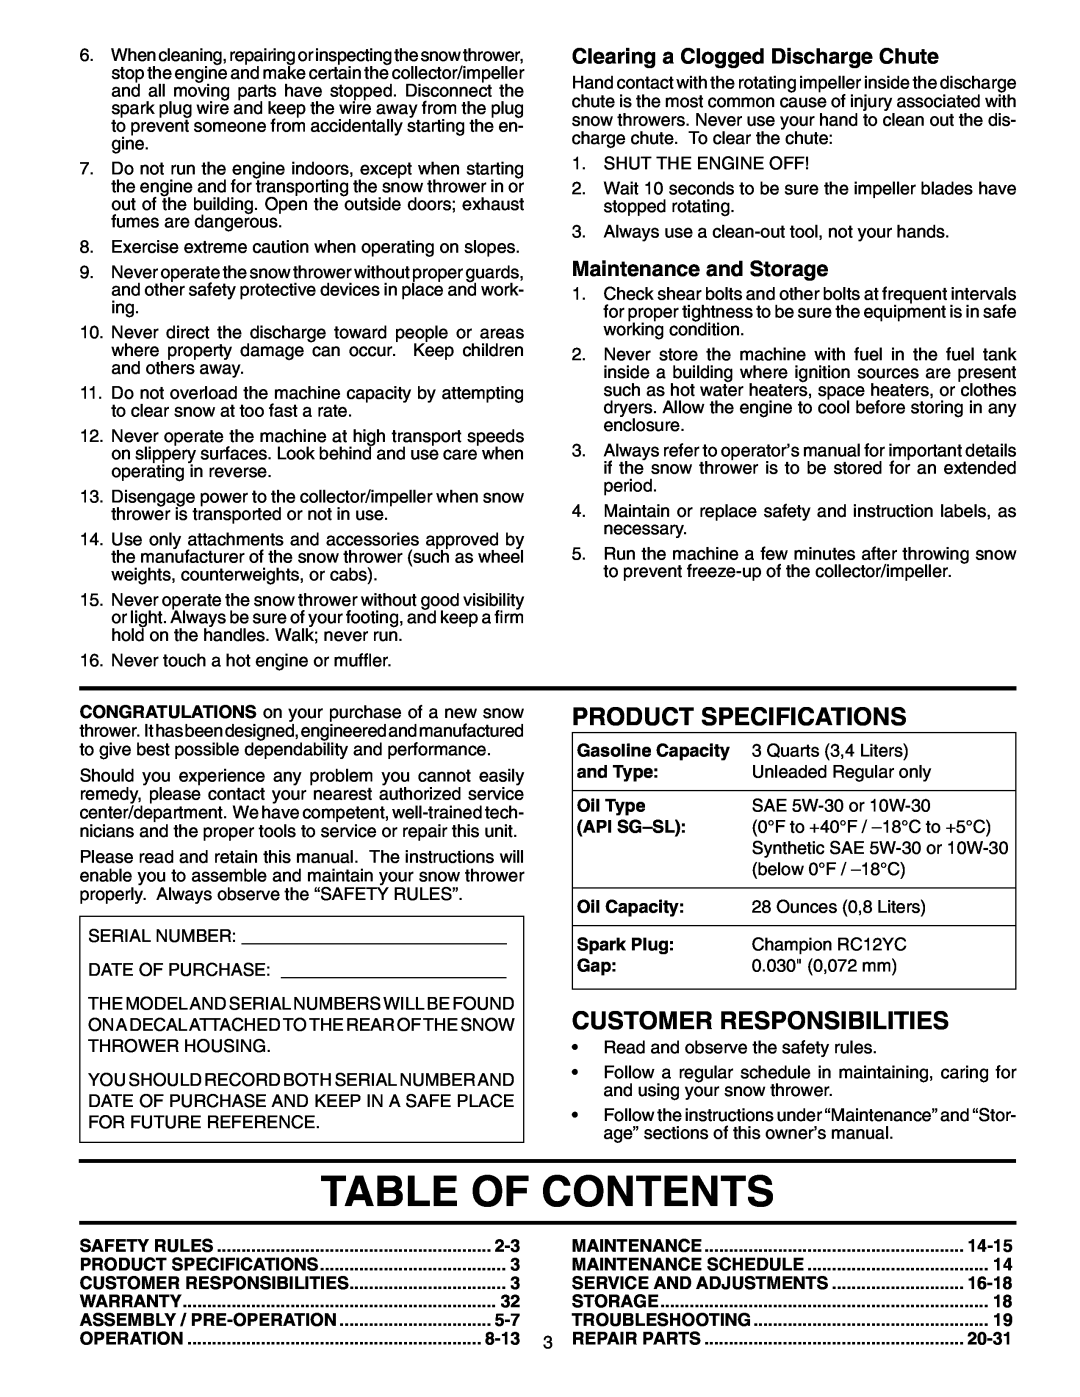 Husqvarna 8527SBEB Table Of Contents, Product Specifications, Customer Responsibilities, Maintenance and Storage, and Type 